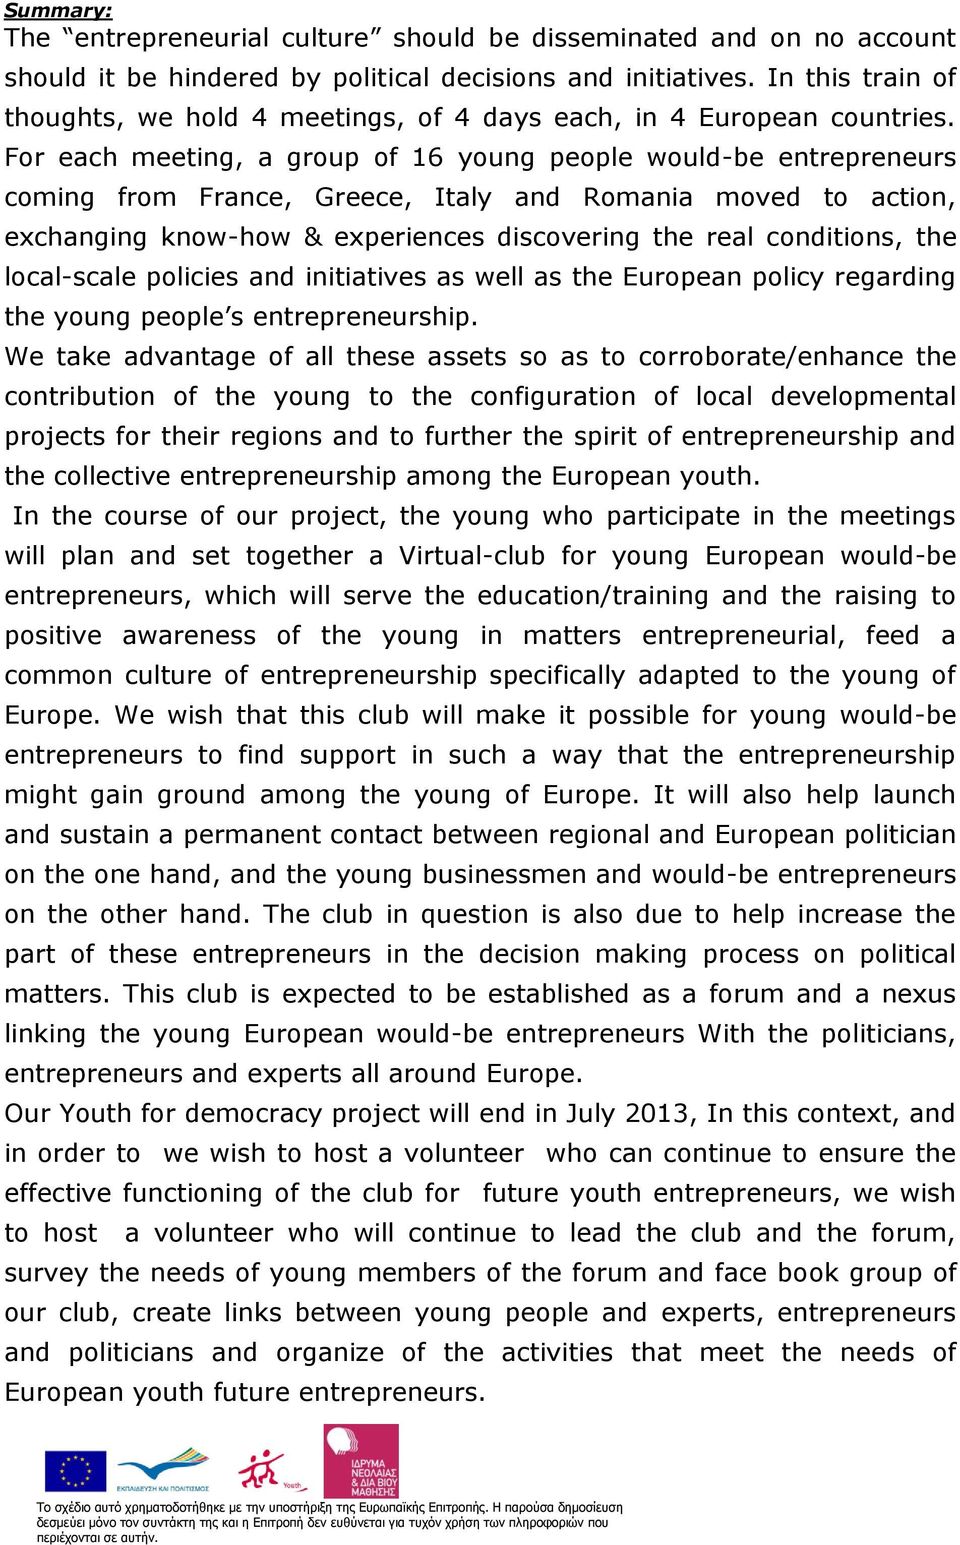 For each meeting, a group of 16 young people would-be entrepreneurs coming from France, Greece, Italy and Romania moved to action, exchanging know-how & experiences discovering the real conditions,